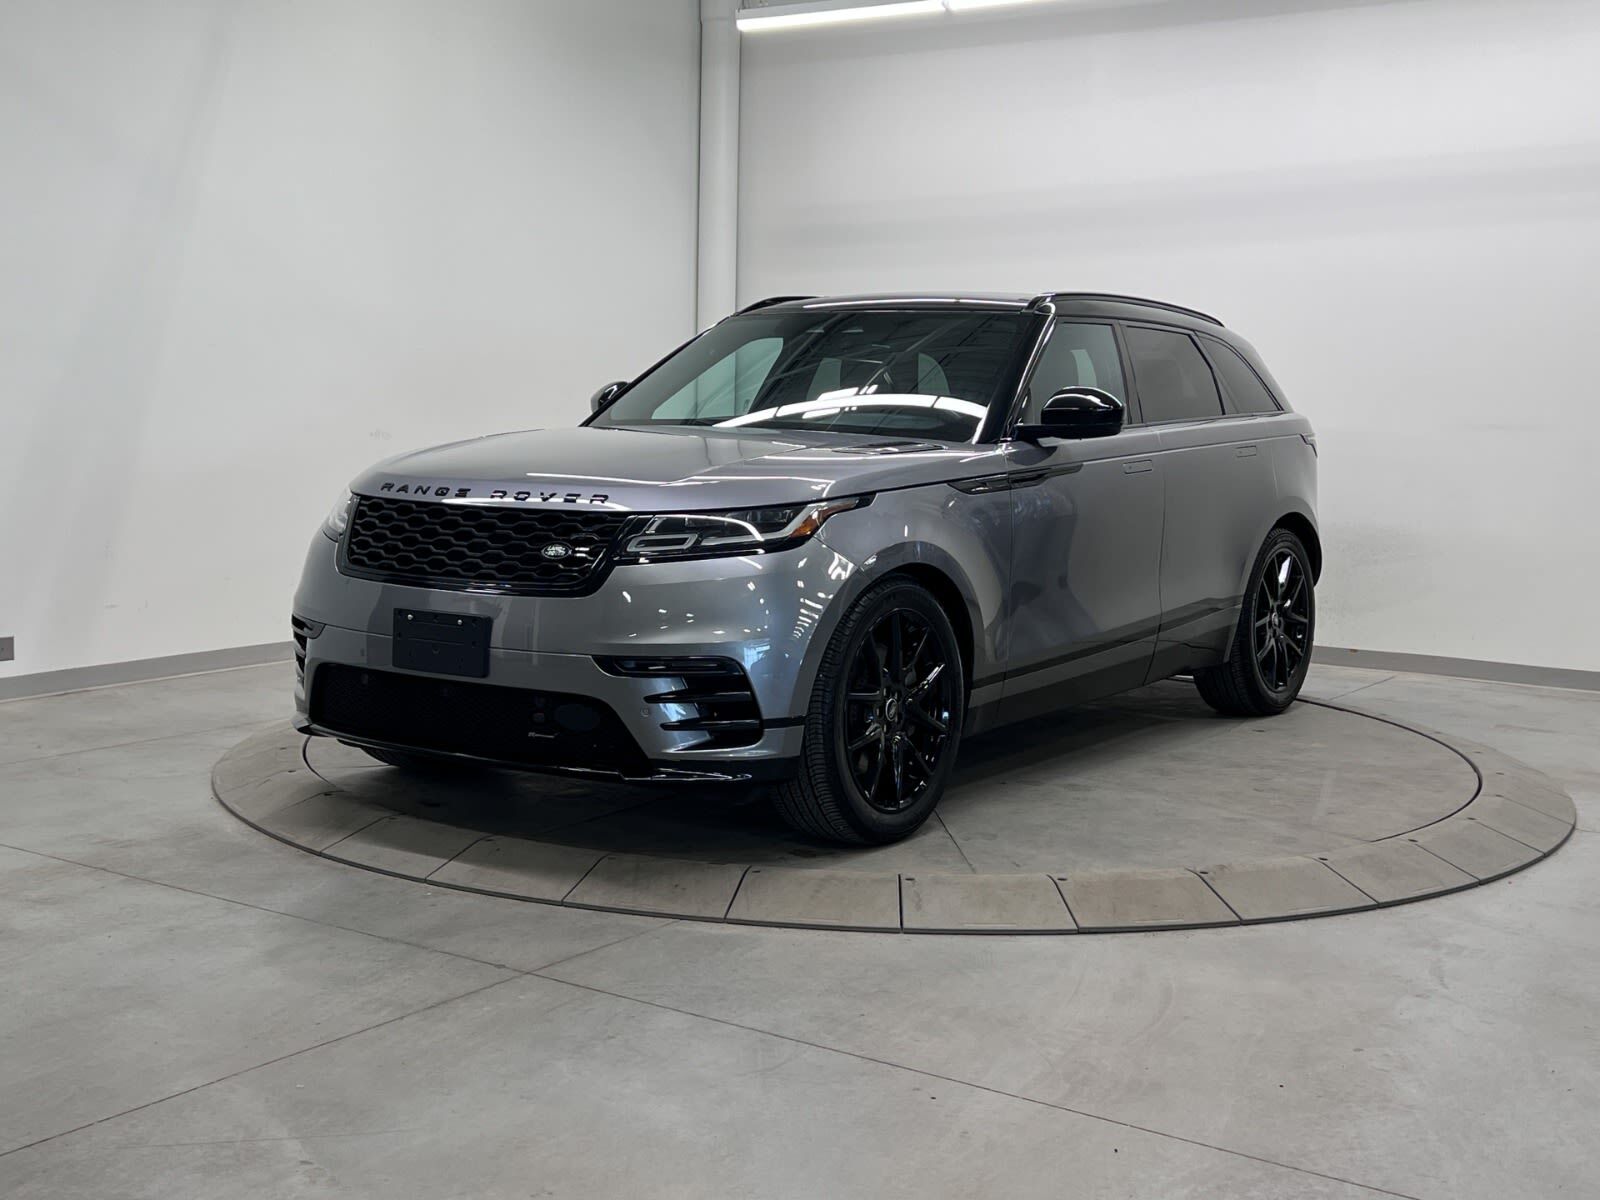 2022 Land Rover Range Rover Velar CERTIFIED PRE OWNED RATES AS LOW AS 5.99%